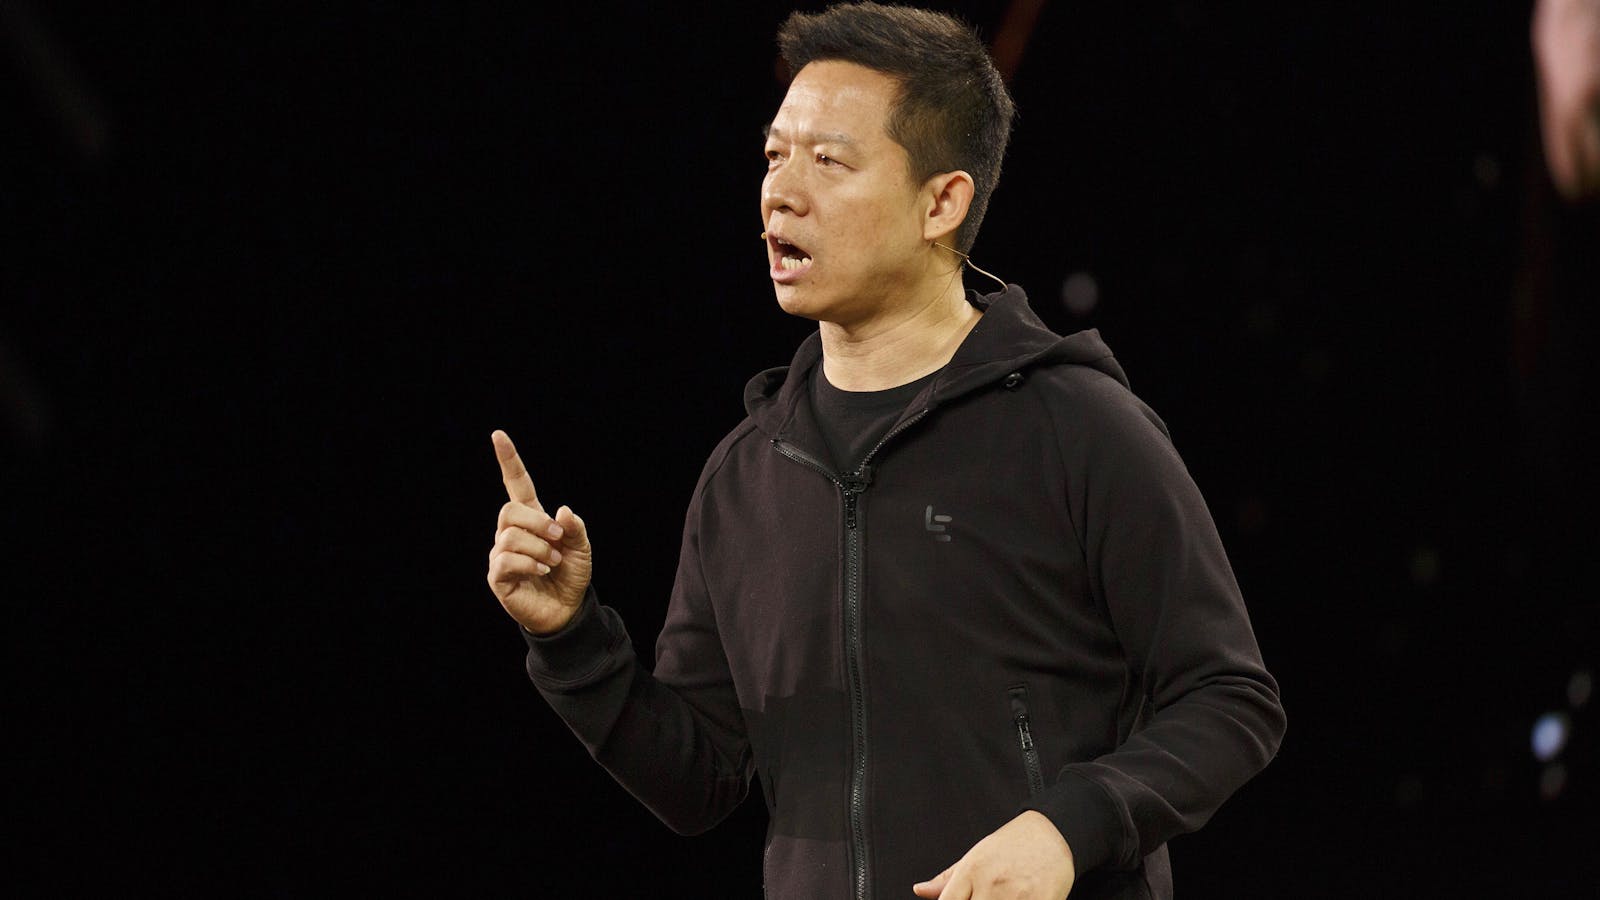 LeEco co-founder Jia Yueting. Photo by Bloomberg.